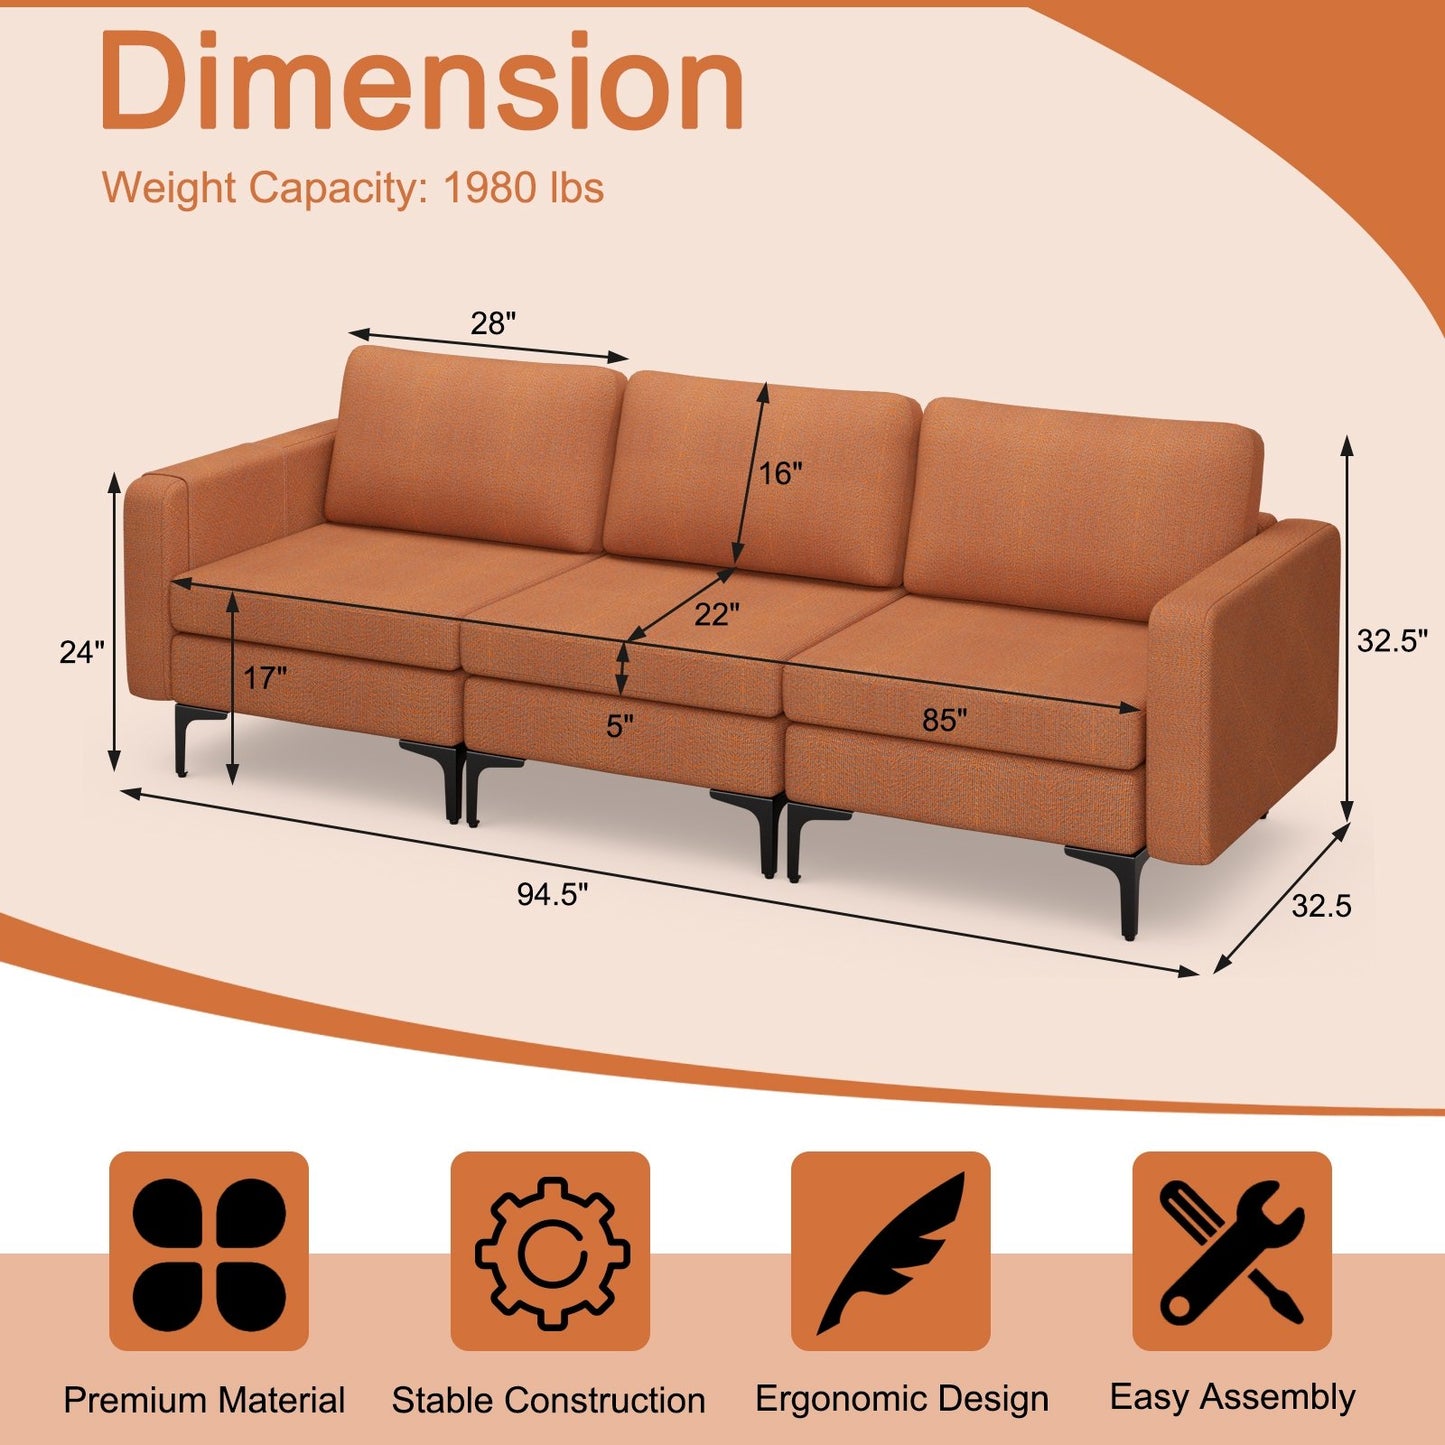 Convertible Leather Sofa Couch with Magazine Pockets 3-Seat with 2 USB Port, Orange